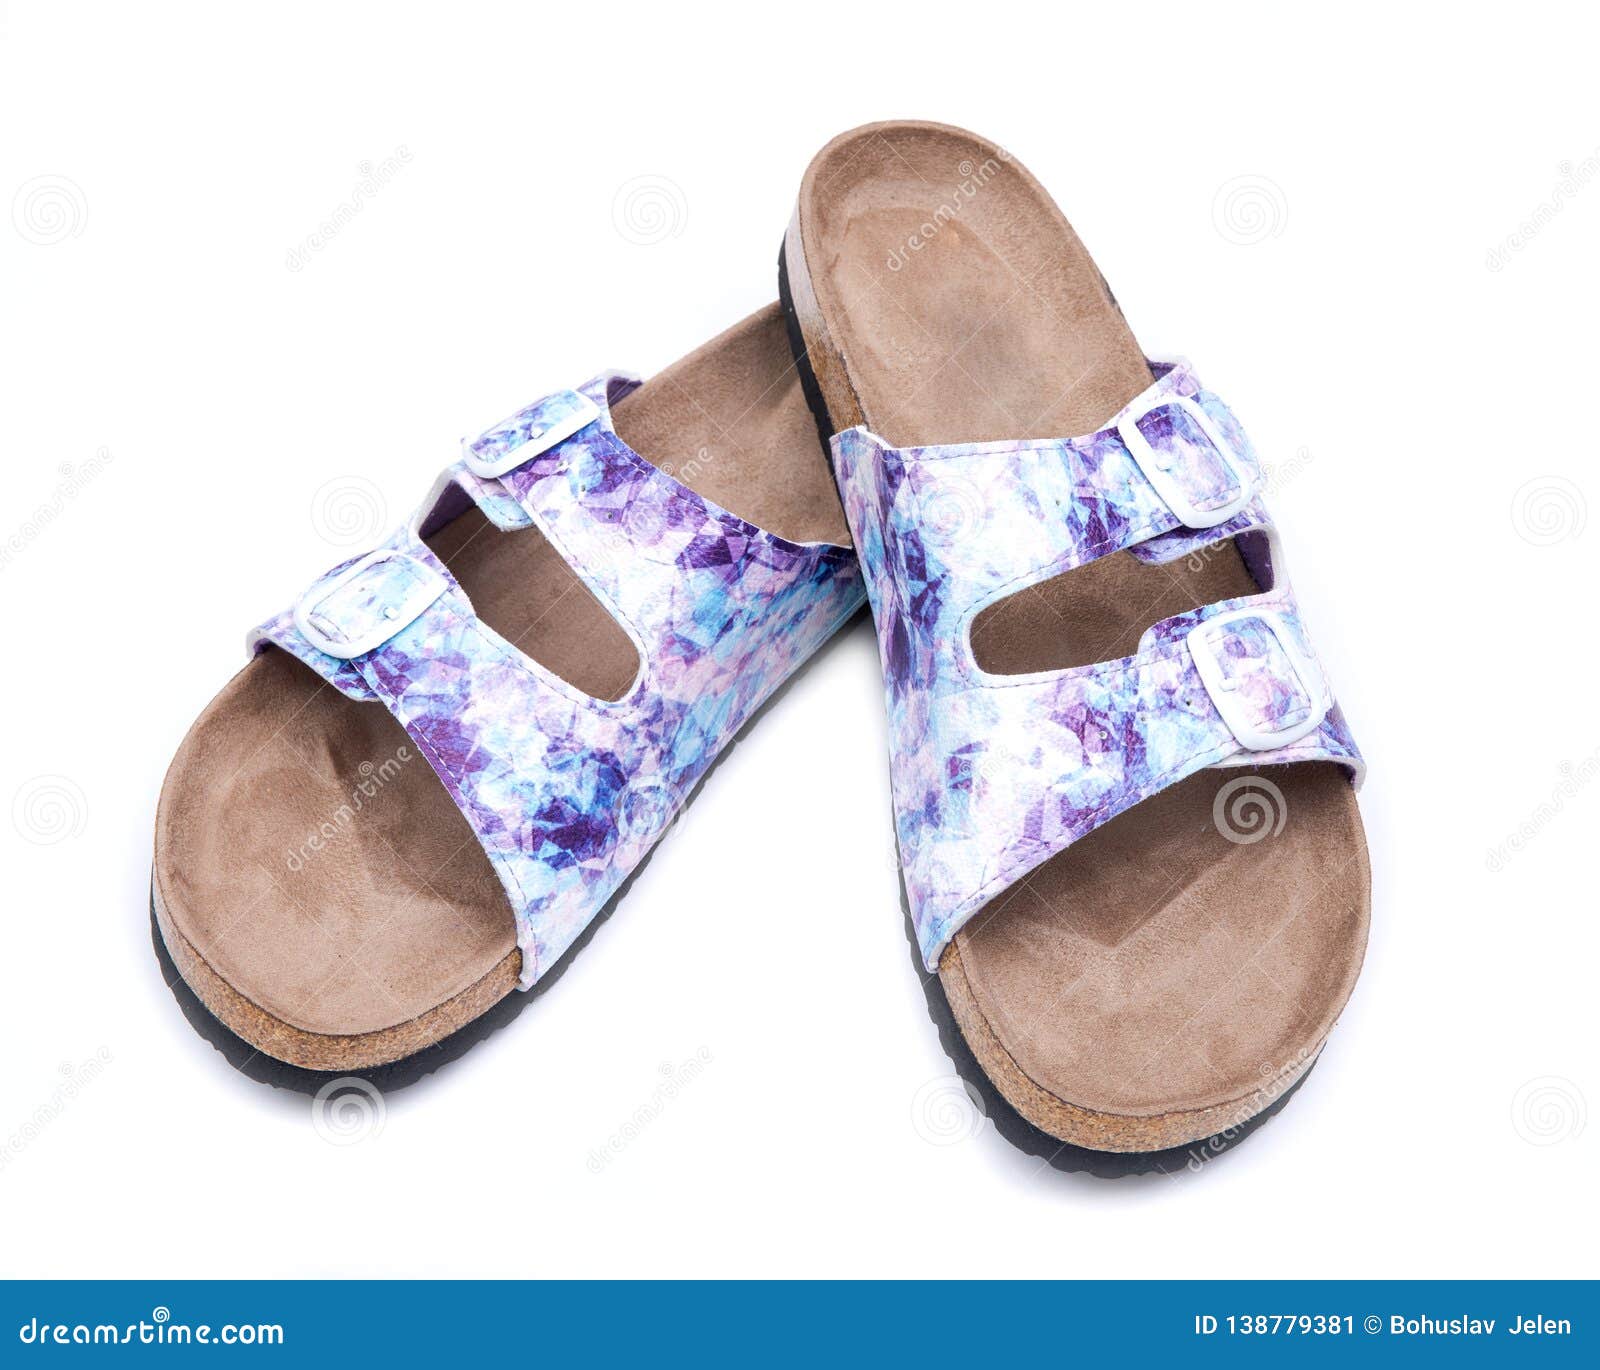 Purple Double Strap Sandals with a Colorful Print on the Faux Leather